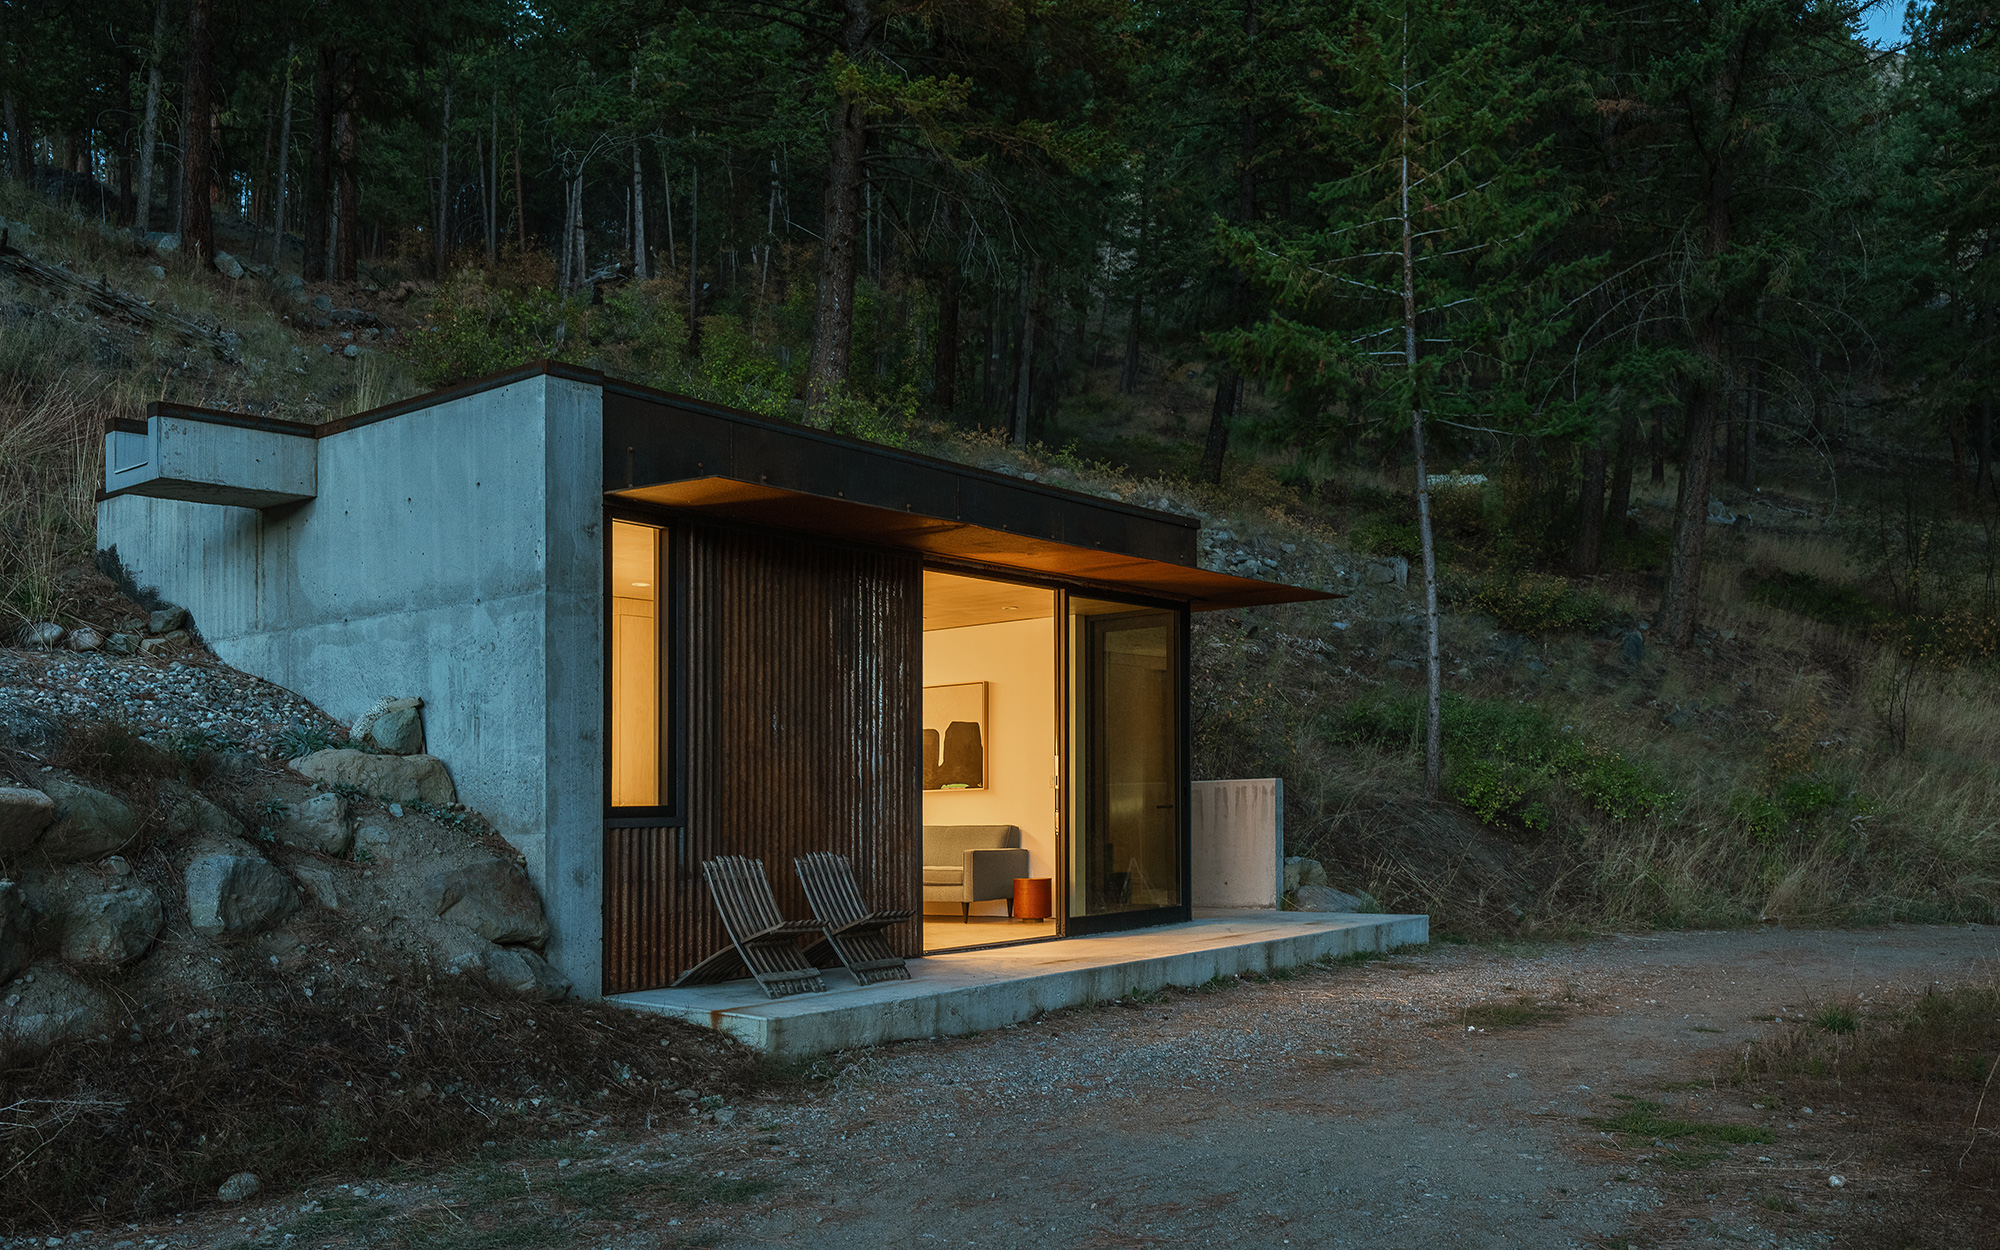 Tinyleaf, Or The Perfect Tiny Cabin - Gessato